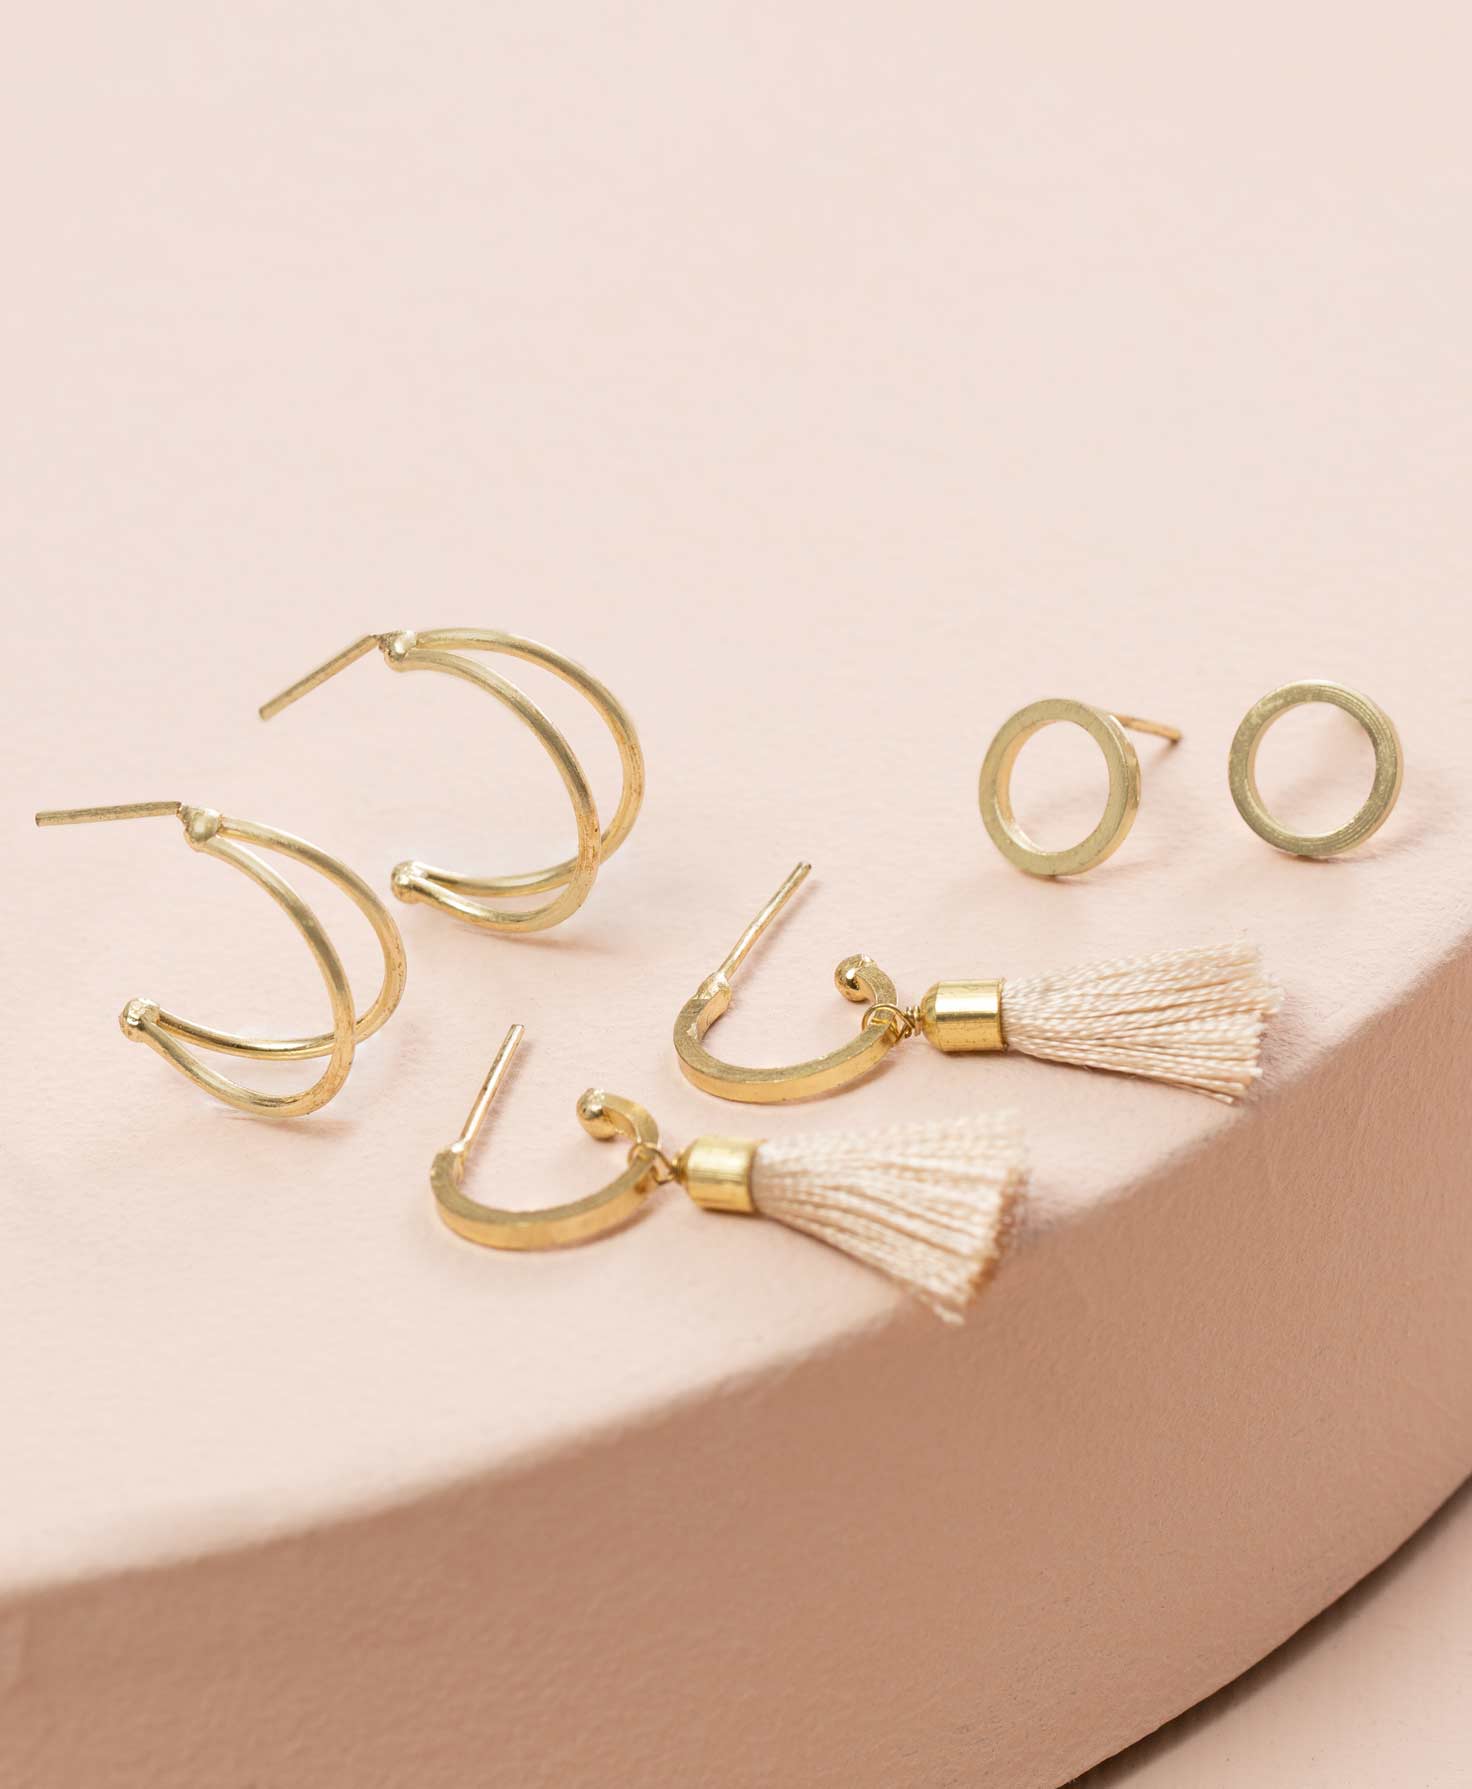 https://www.noondaycollection.info/img/product/essential-earrings,-set-of-3/essential-earrings,-set-of-3-large.jpg